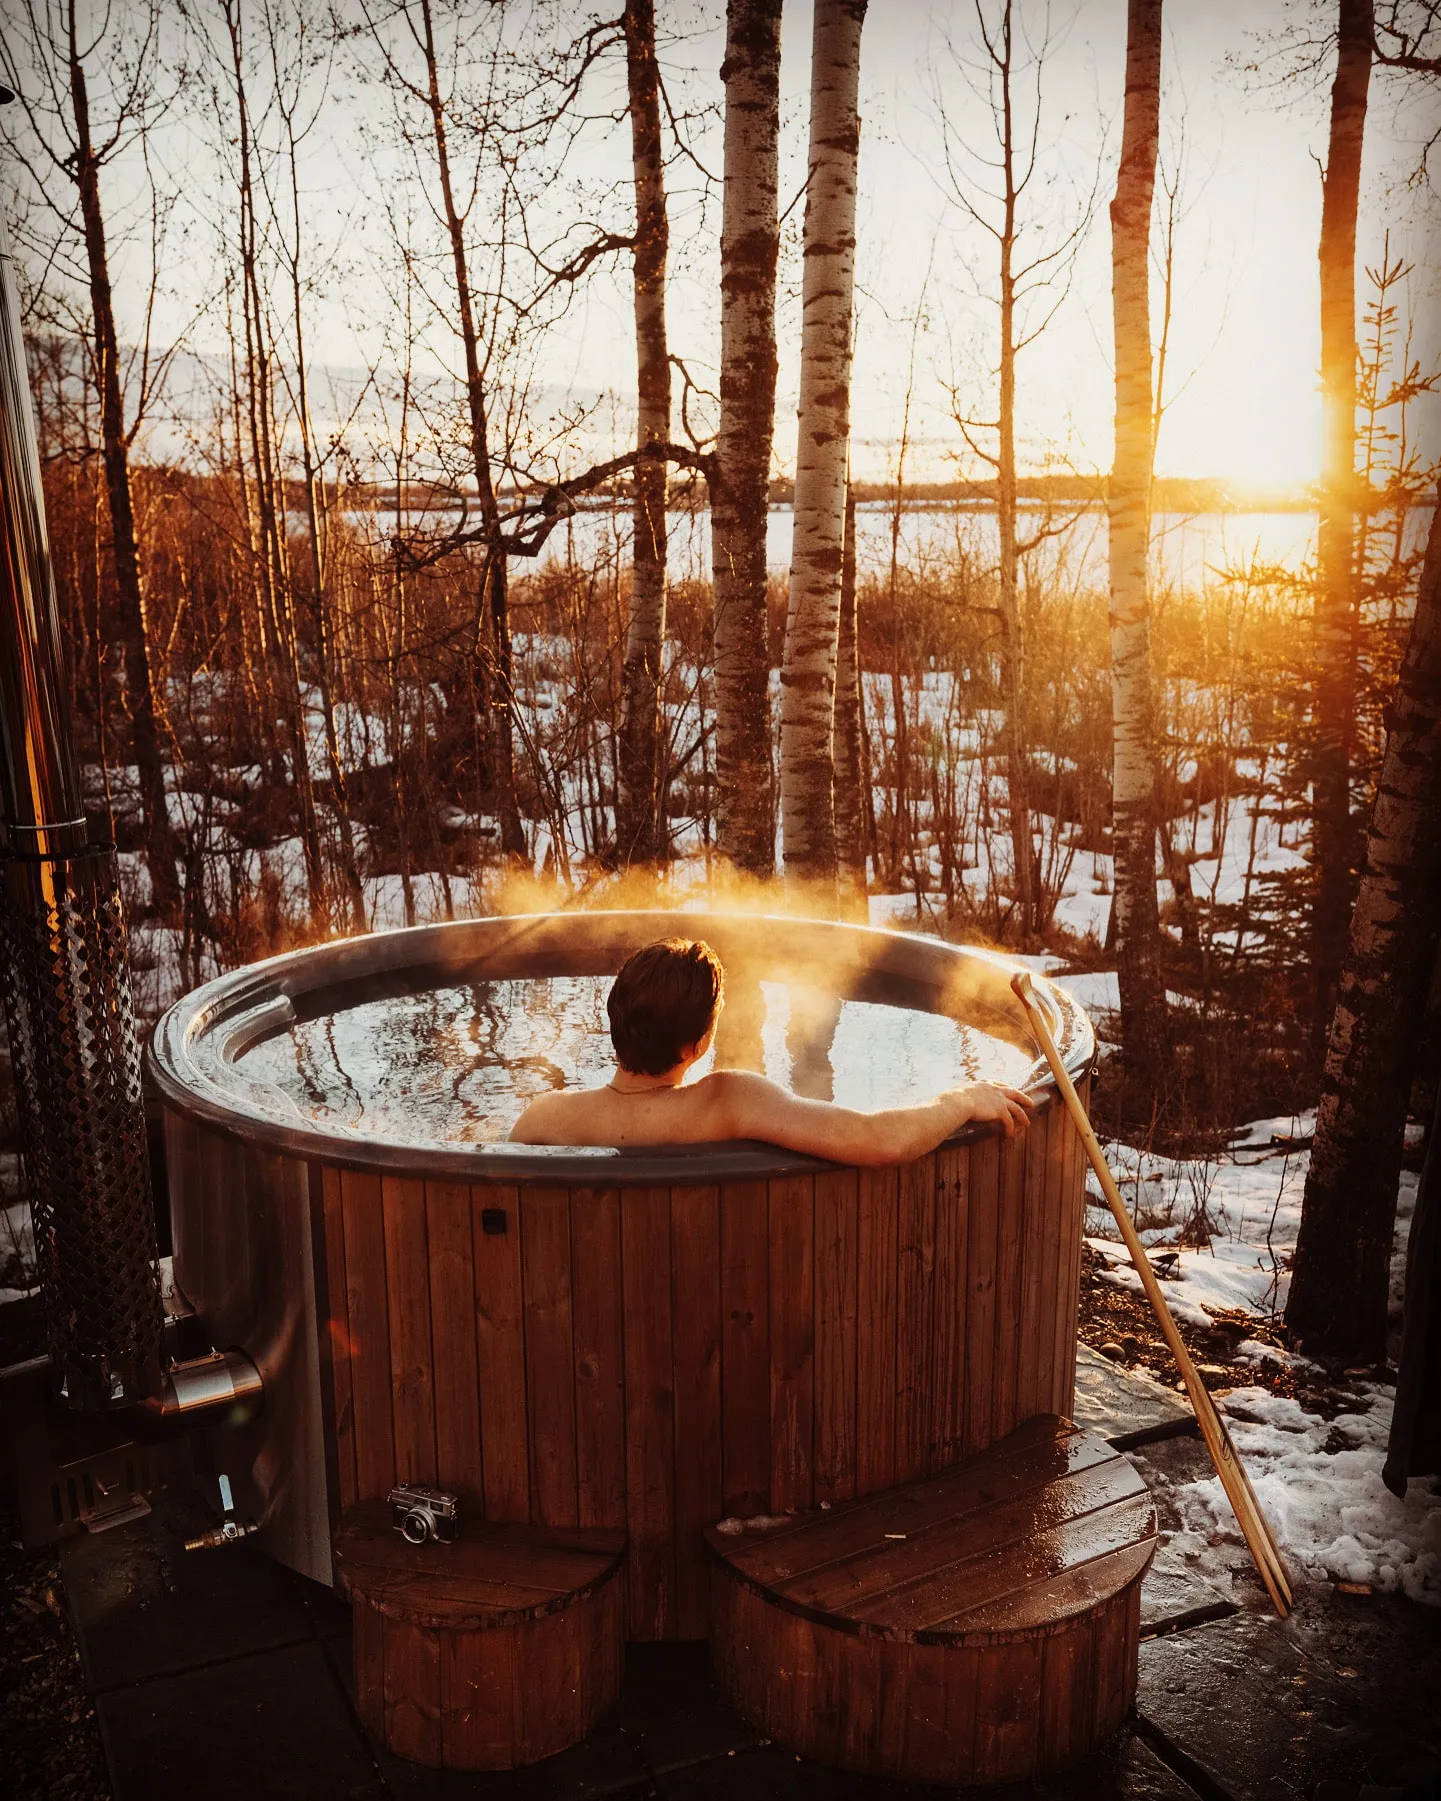 man sitting and relaxing in outdoor hot tub while looking forest and lake during a sunset.